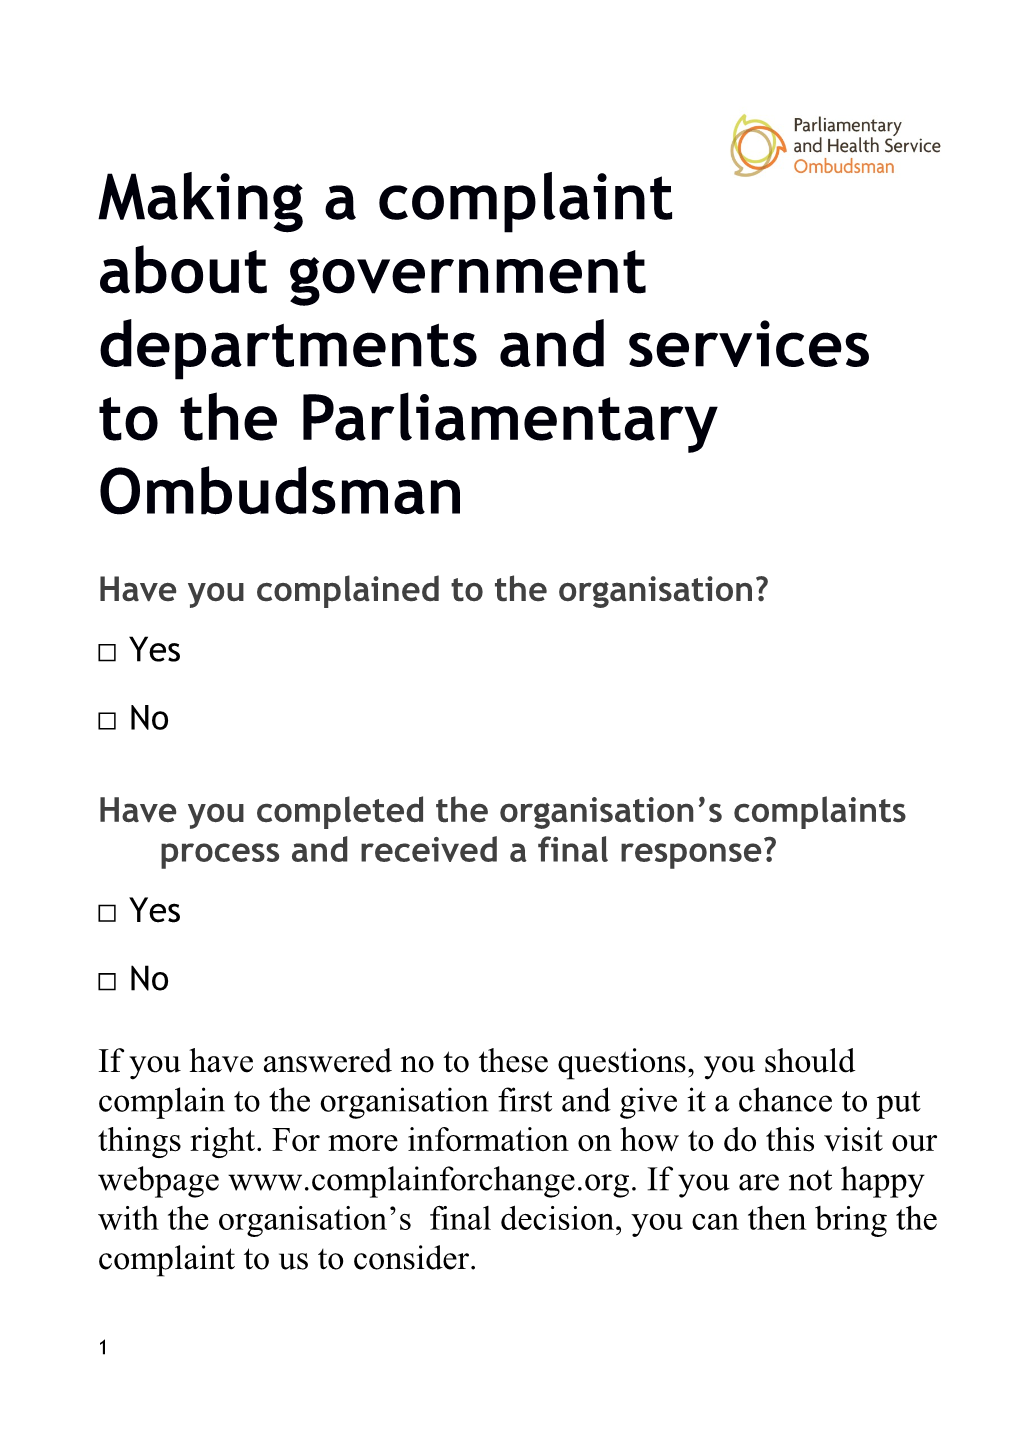 Have You Complained to the Organisation?